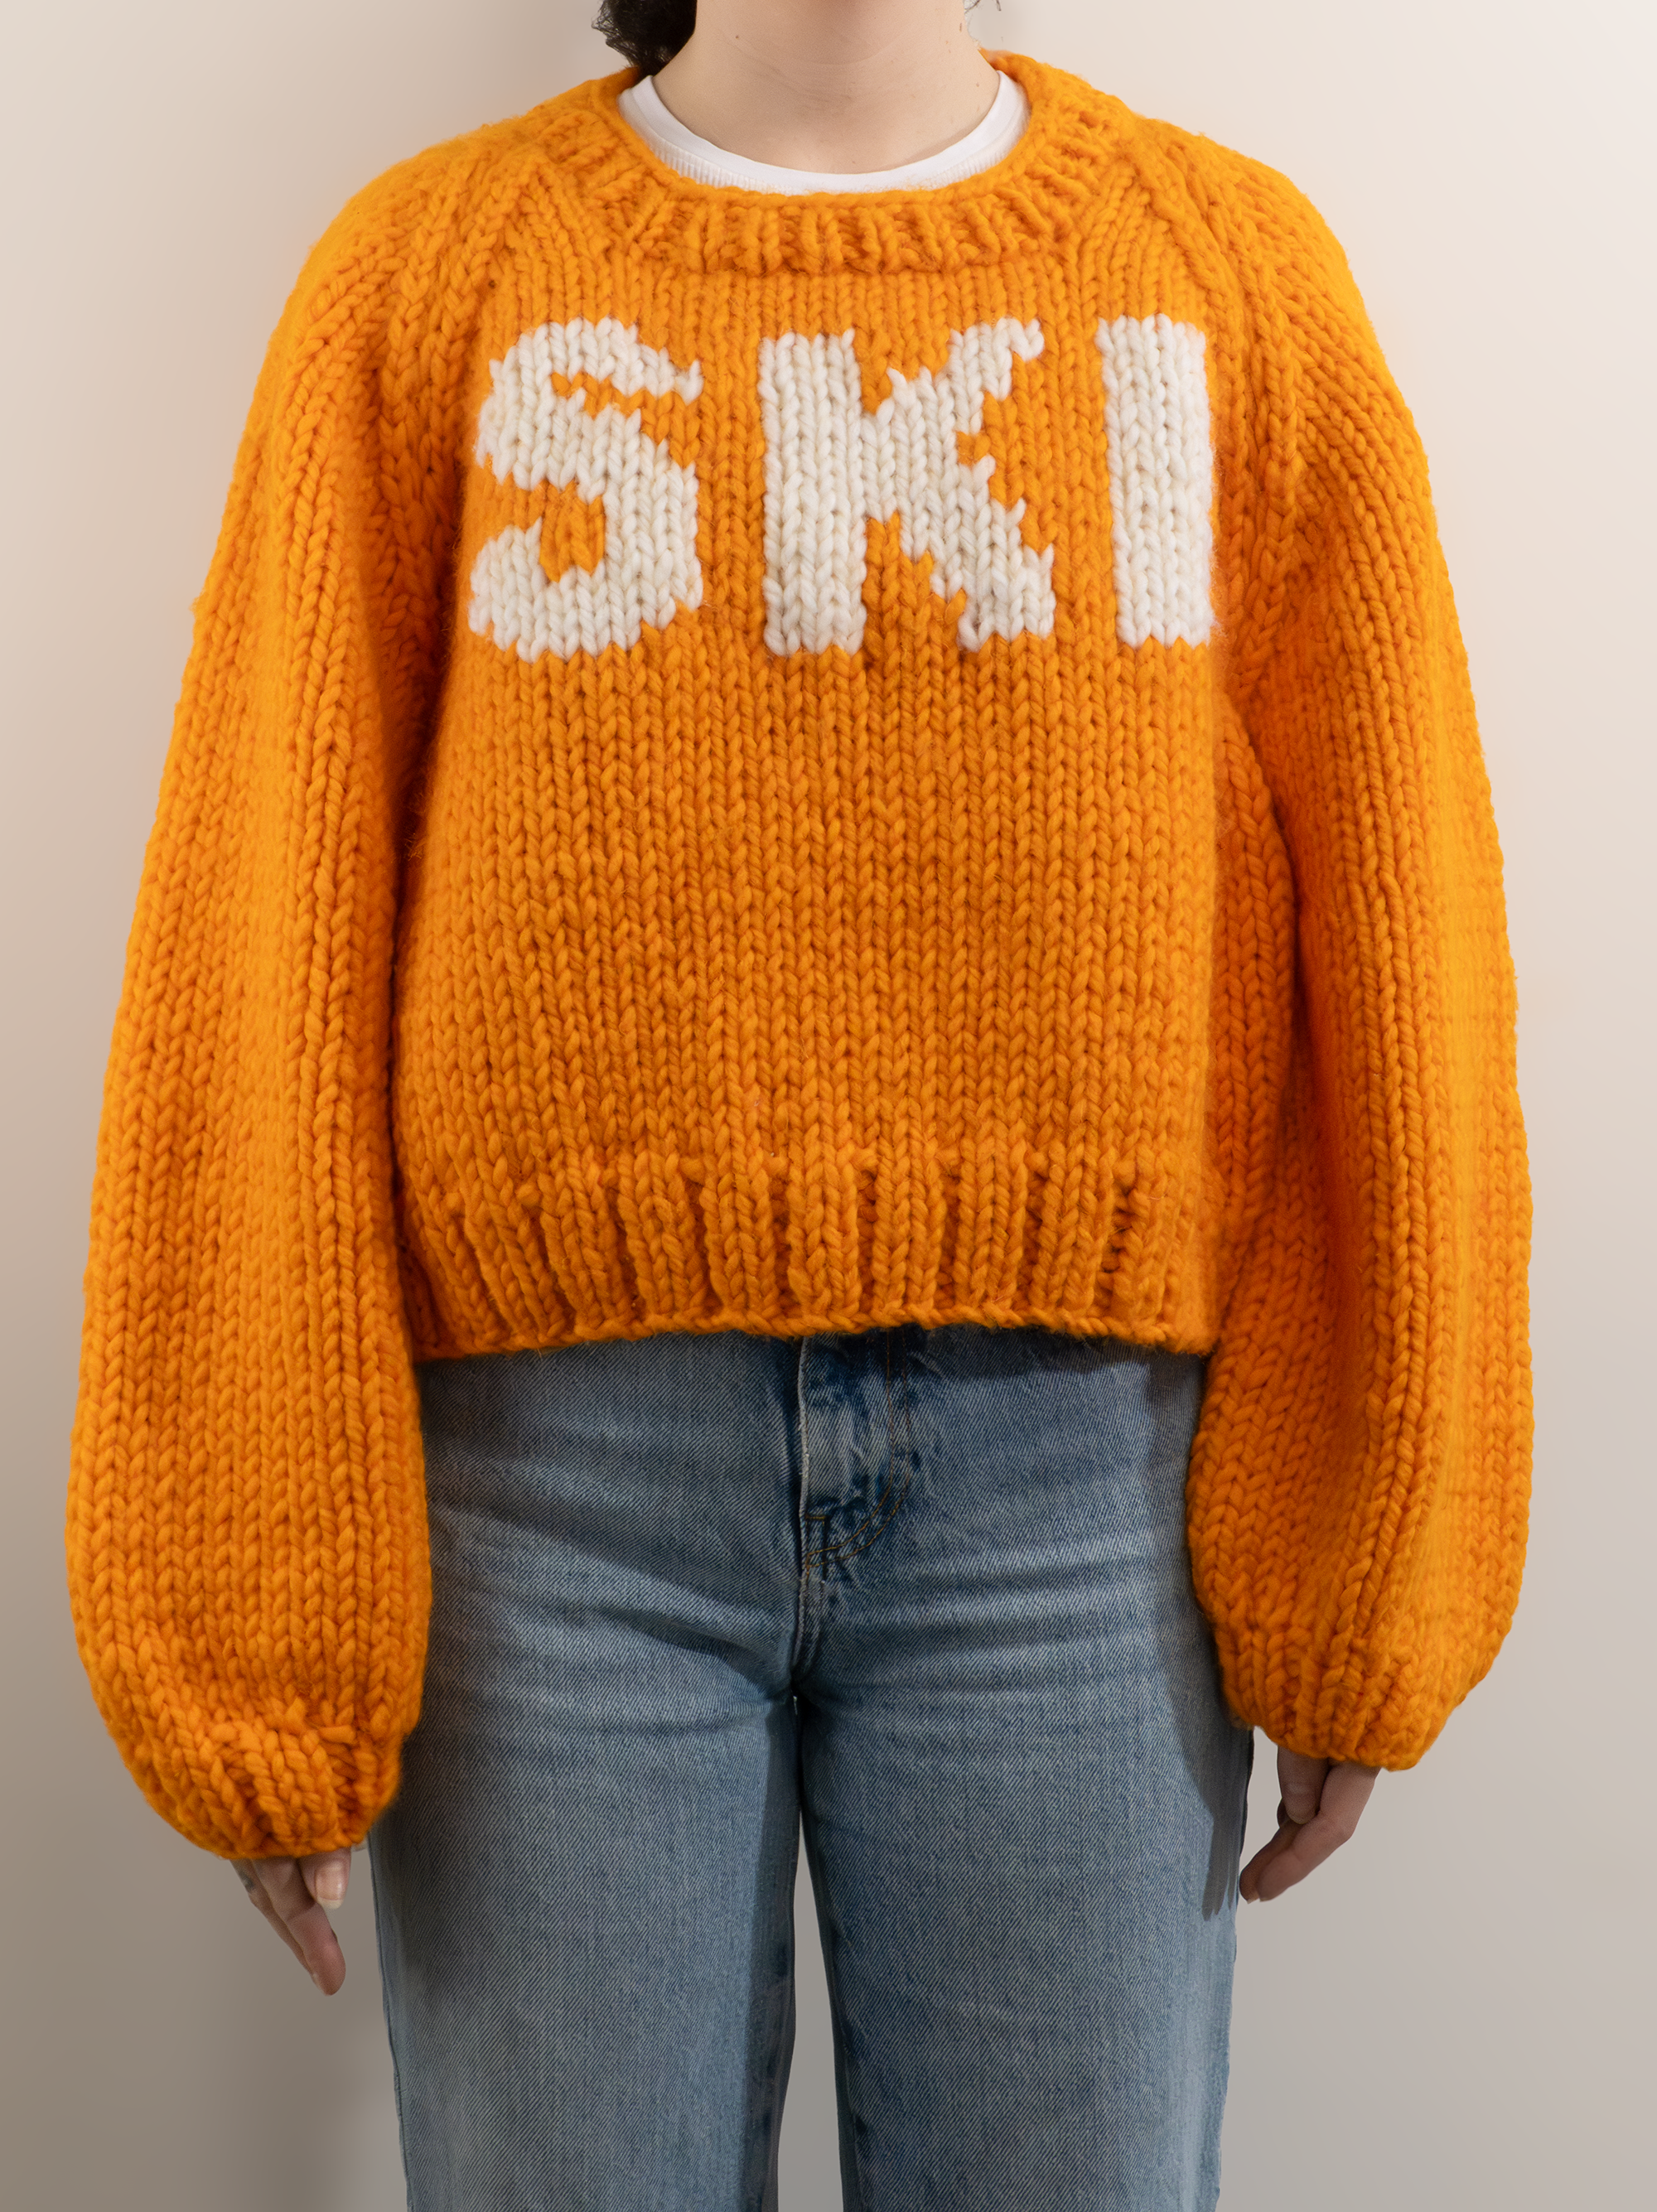 Ski Pullover (Knitters First) Marigold/Snow - Sample Sale 24